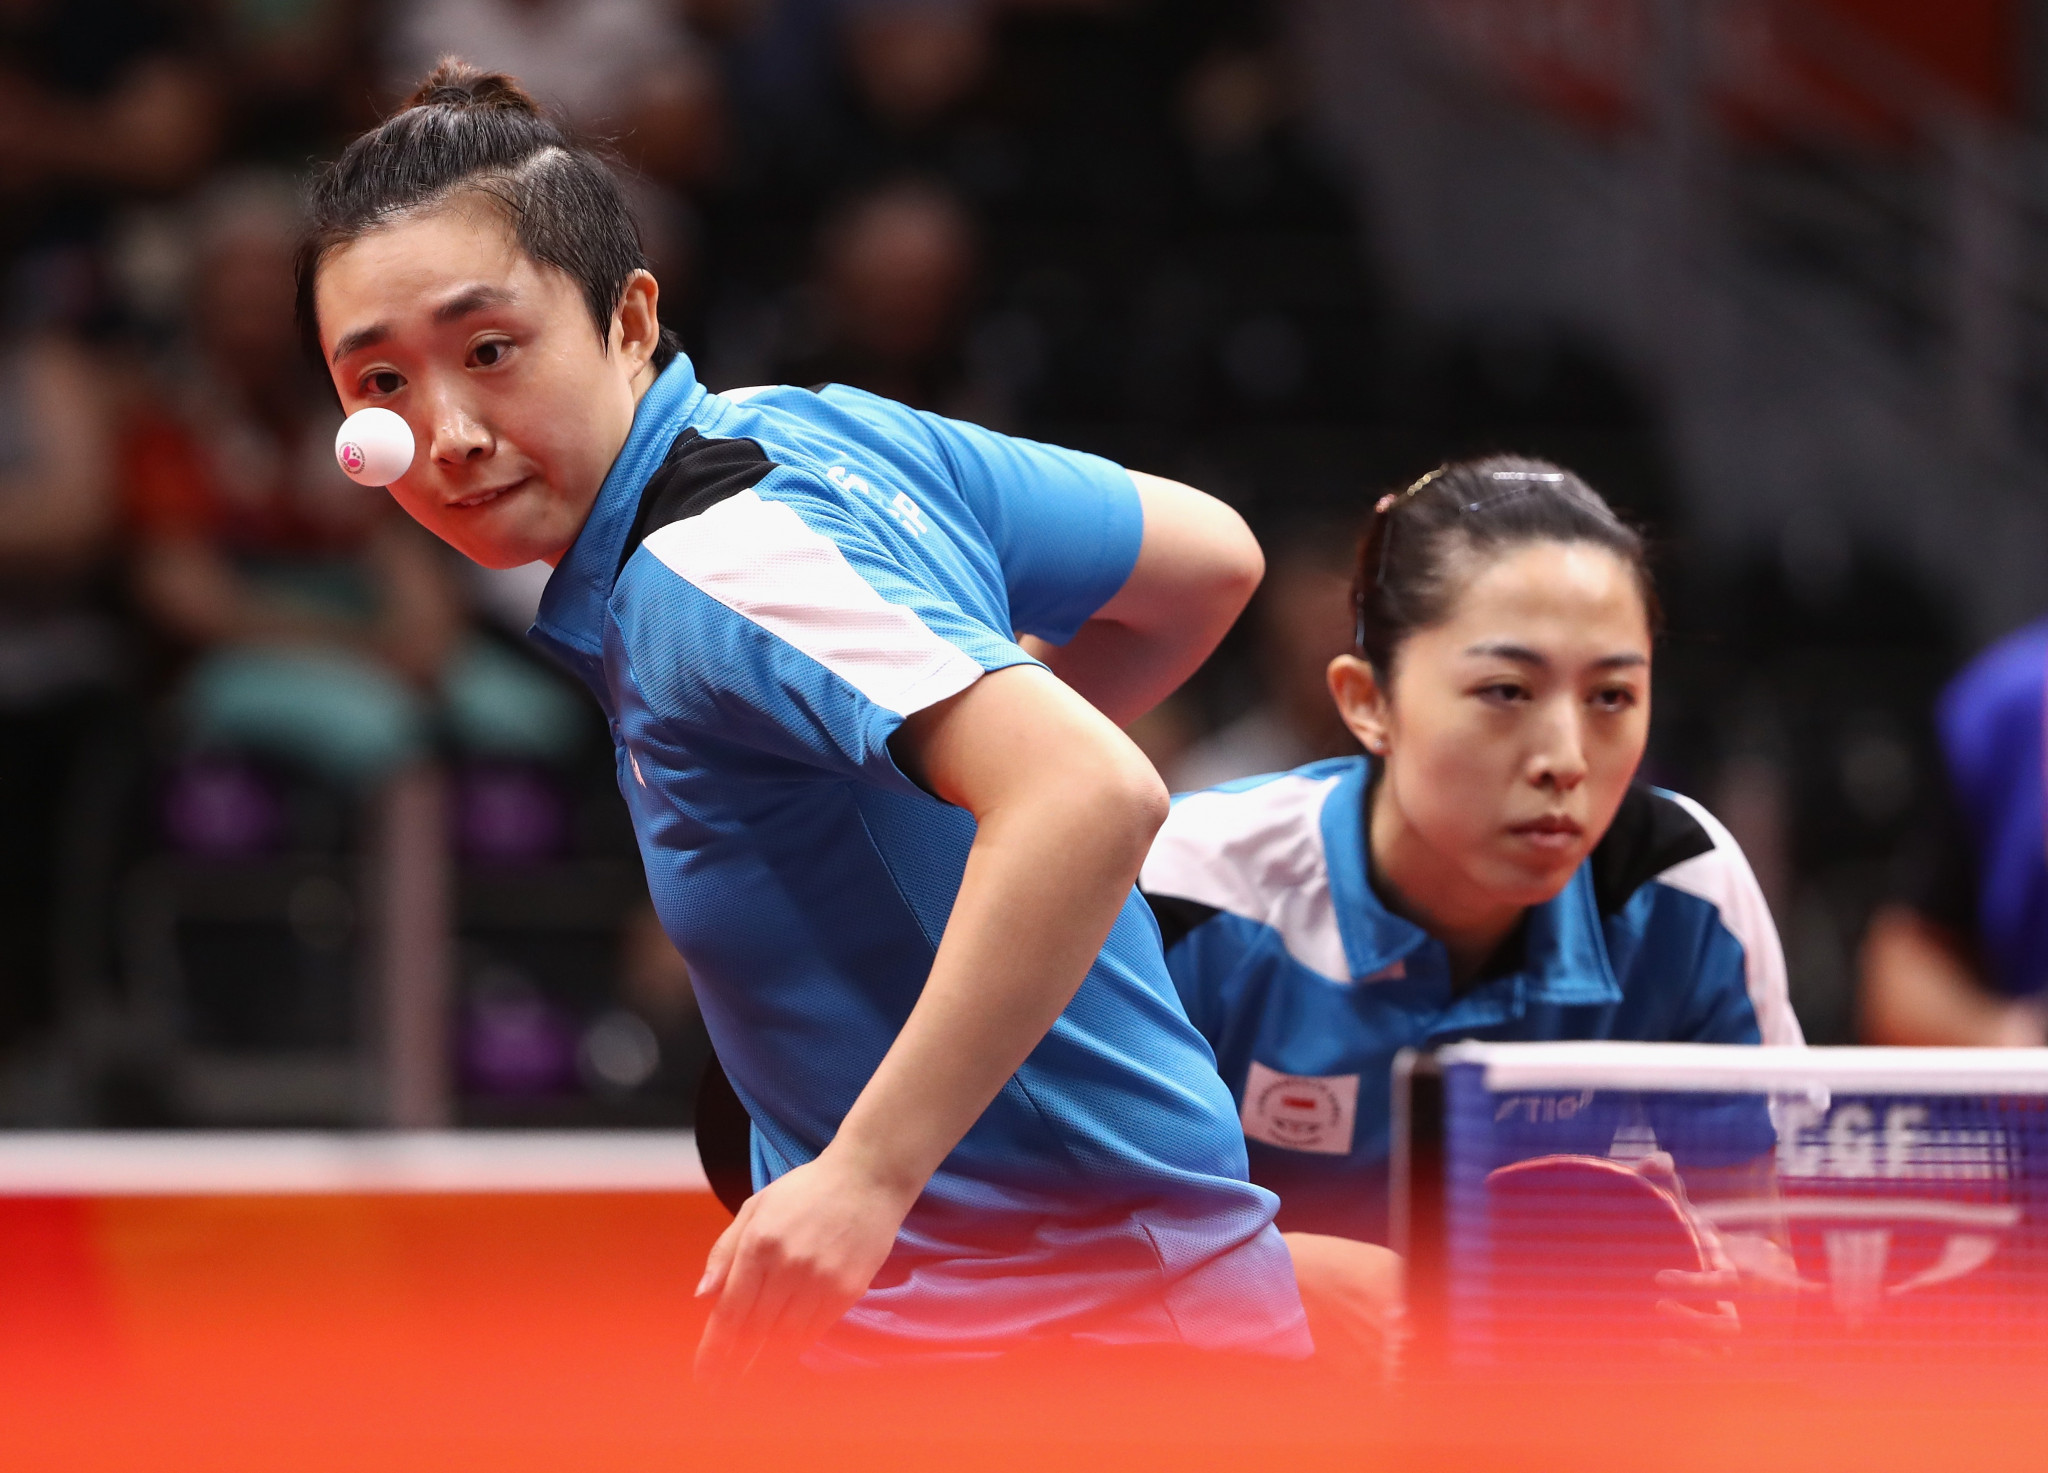 Singapore's Feng Tianwei and Yu Mengyu romped to a comfortable defence of their Commonwealth Games women's doubles title ©Getty Images